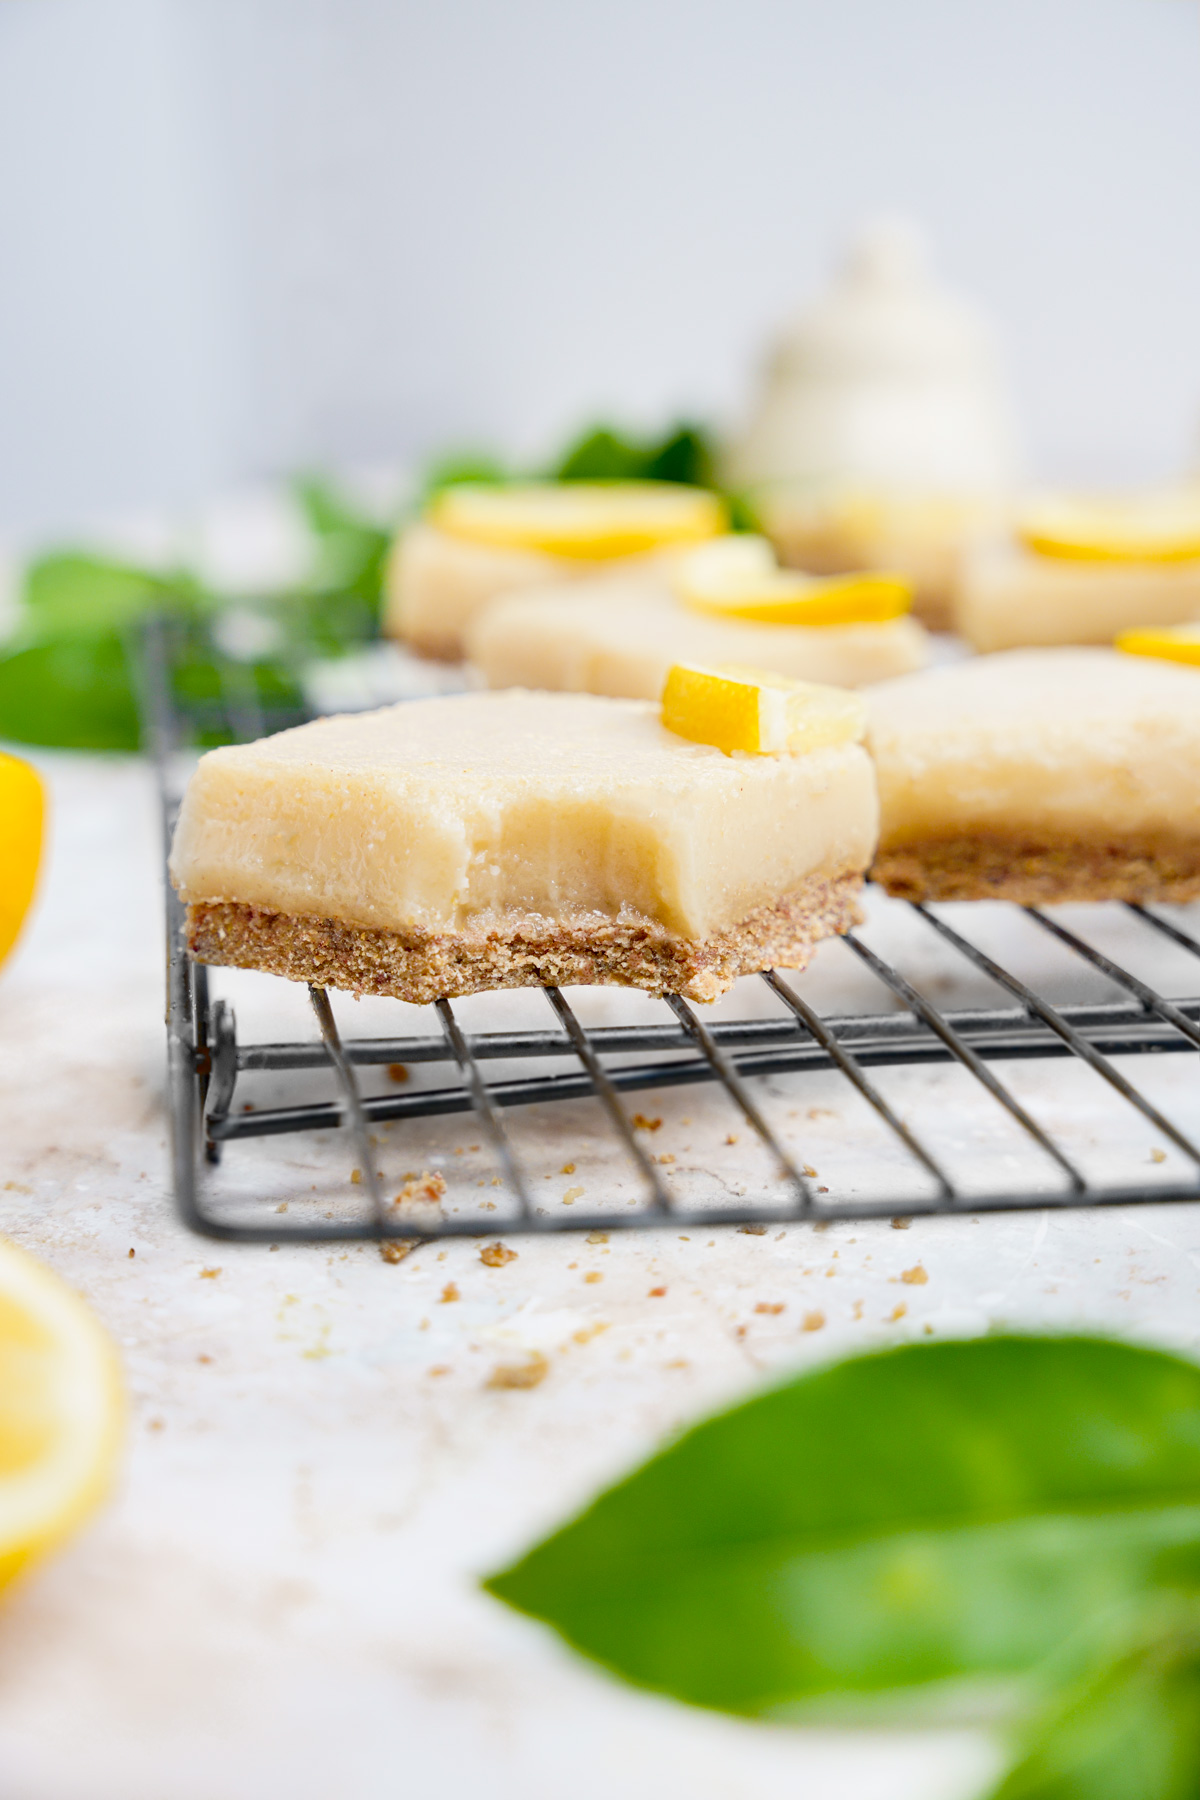 the vegan lemon bars with a bite taken out of them to show the firm gooey texture.